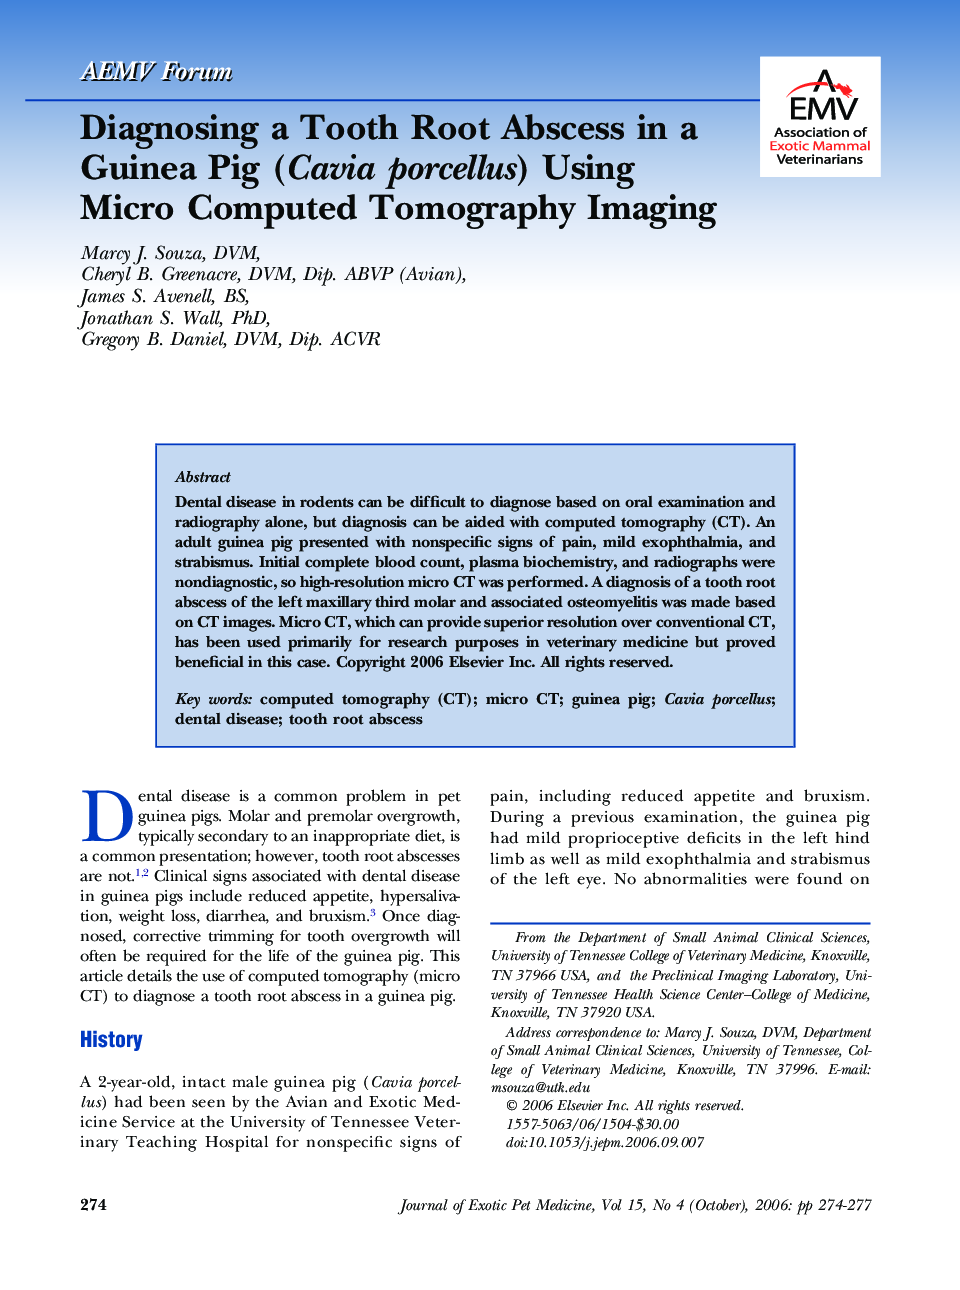 Diagnosing a Tooth Root Abscess in a Guinea Pig (Cavia porcellus) Using Micro Computed Tomography Imaging